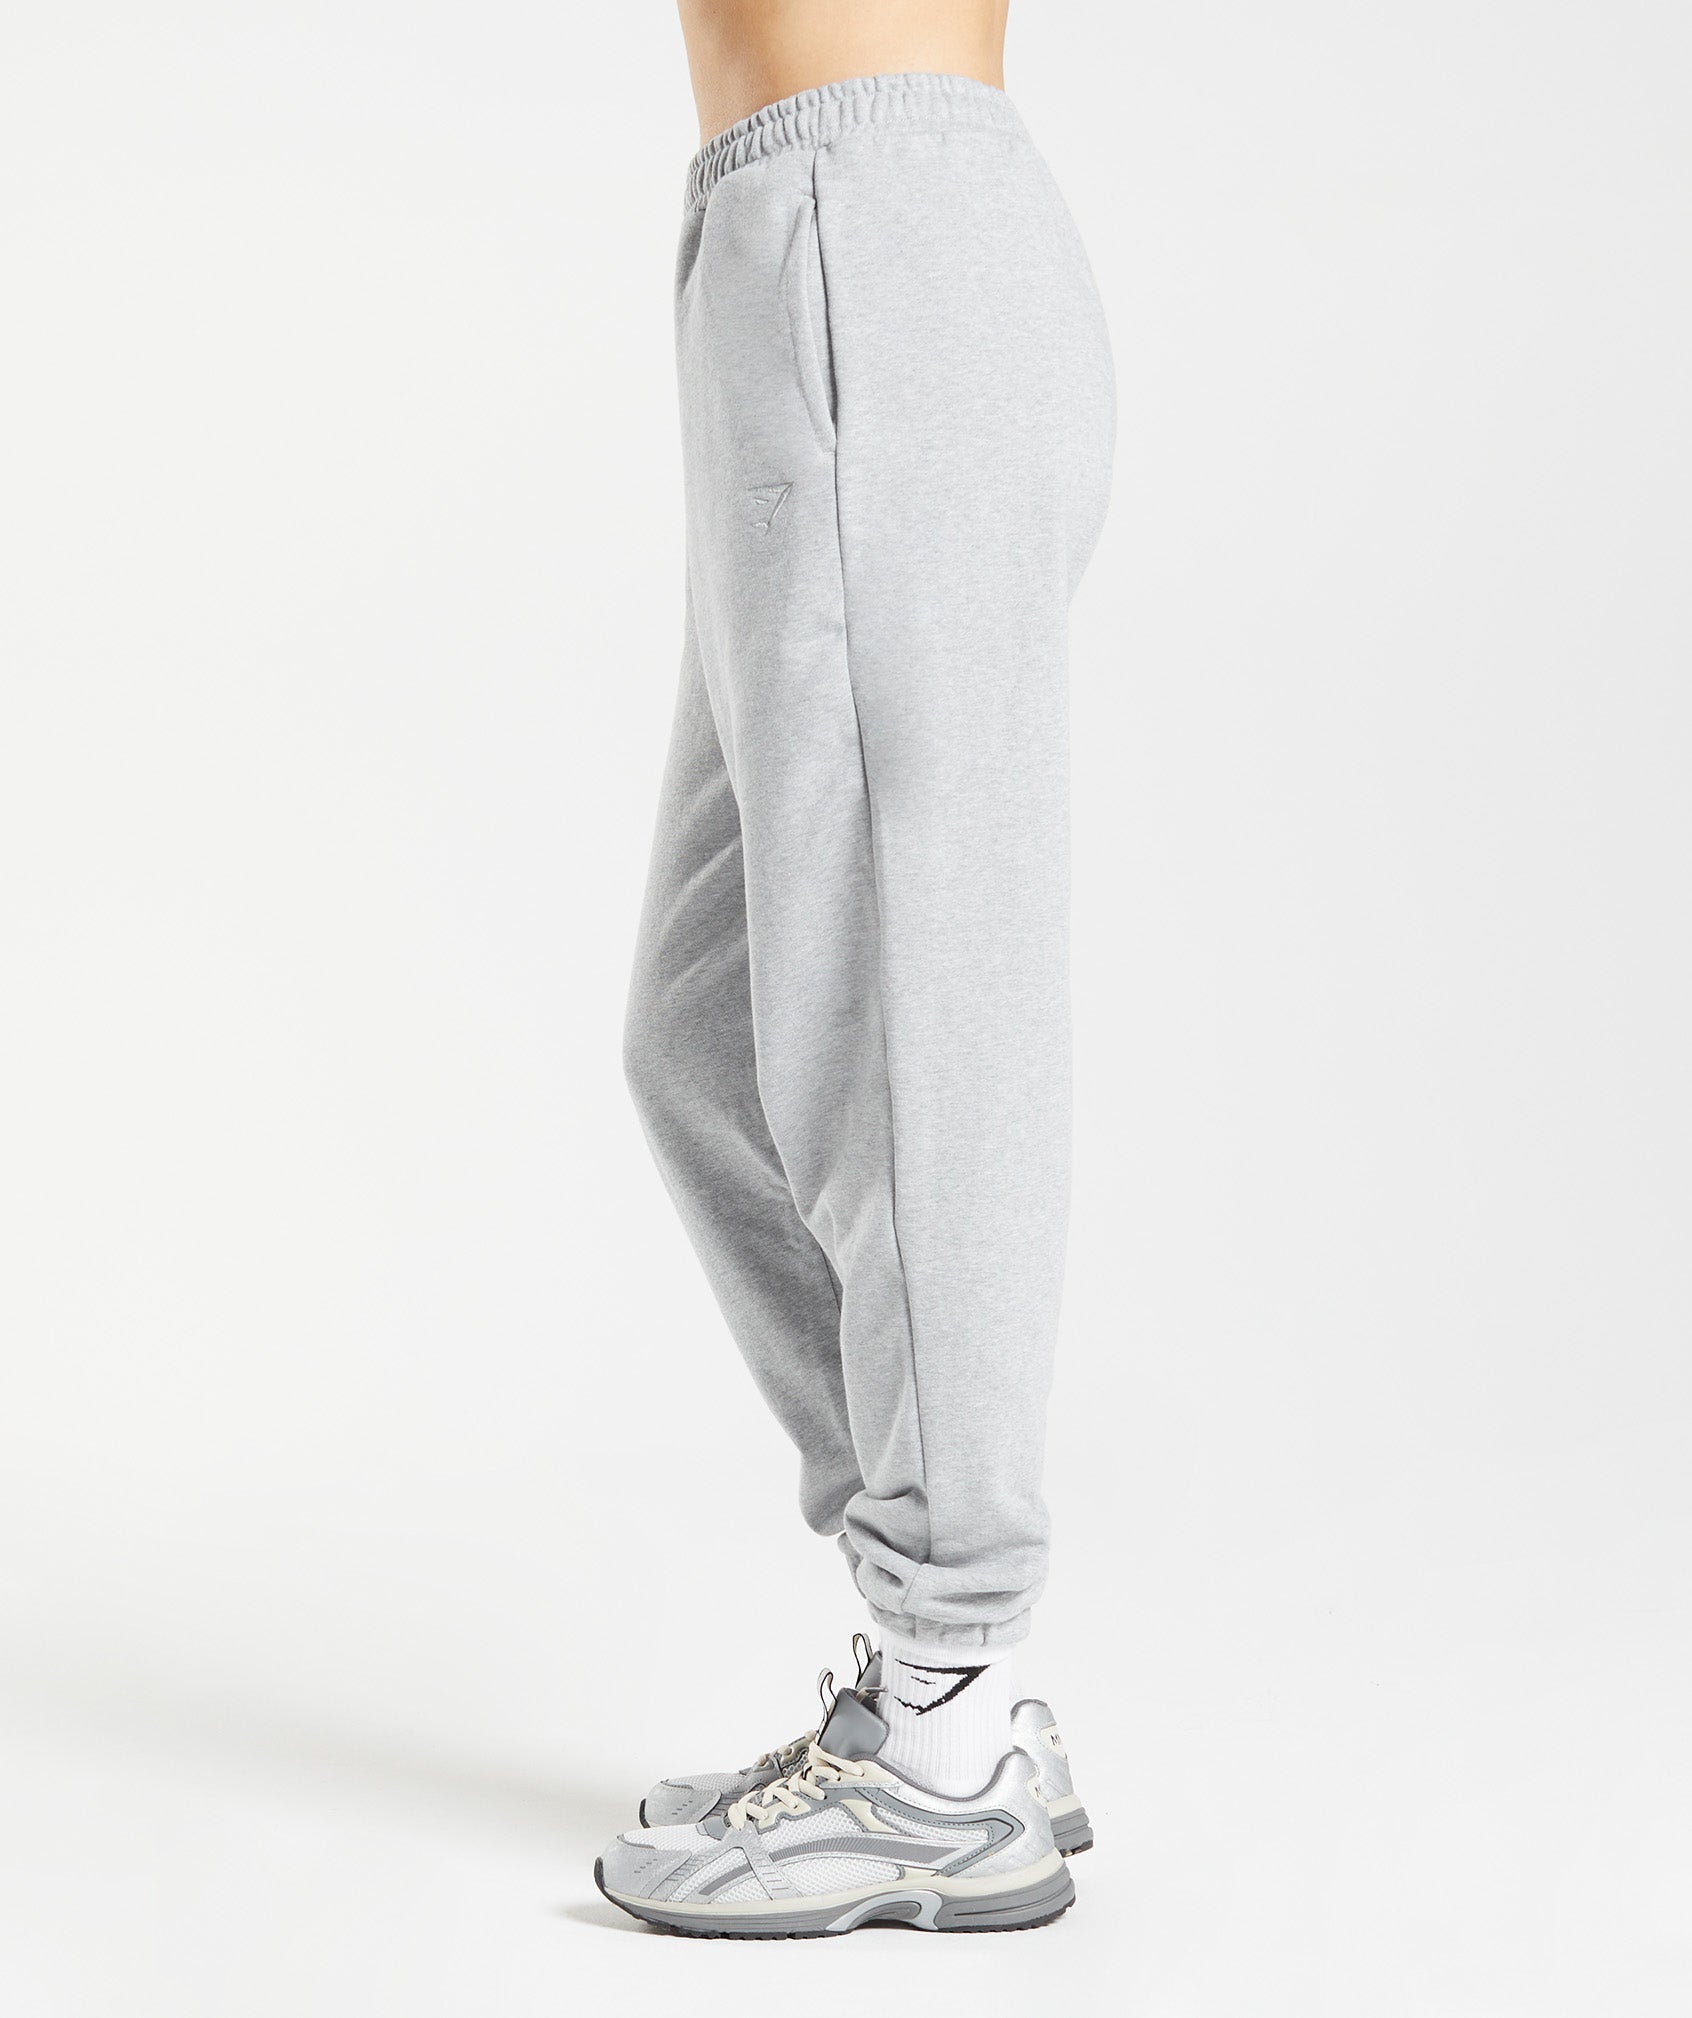 Rest Day Sweats Joggers in Light Grey Core Marl